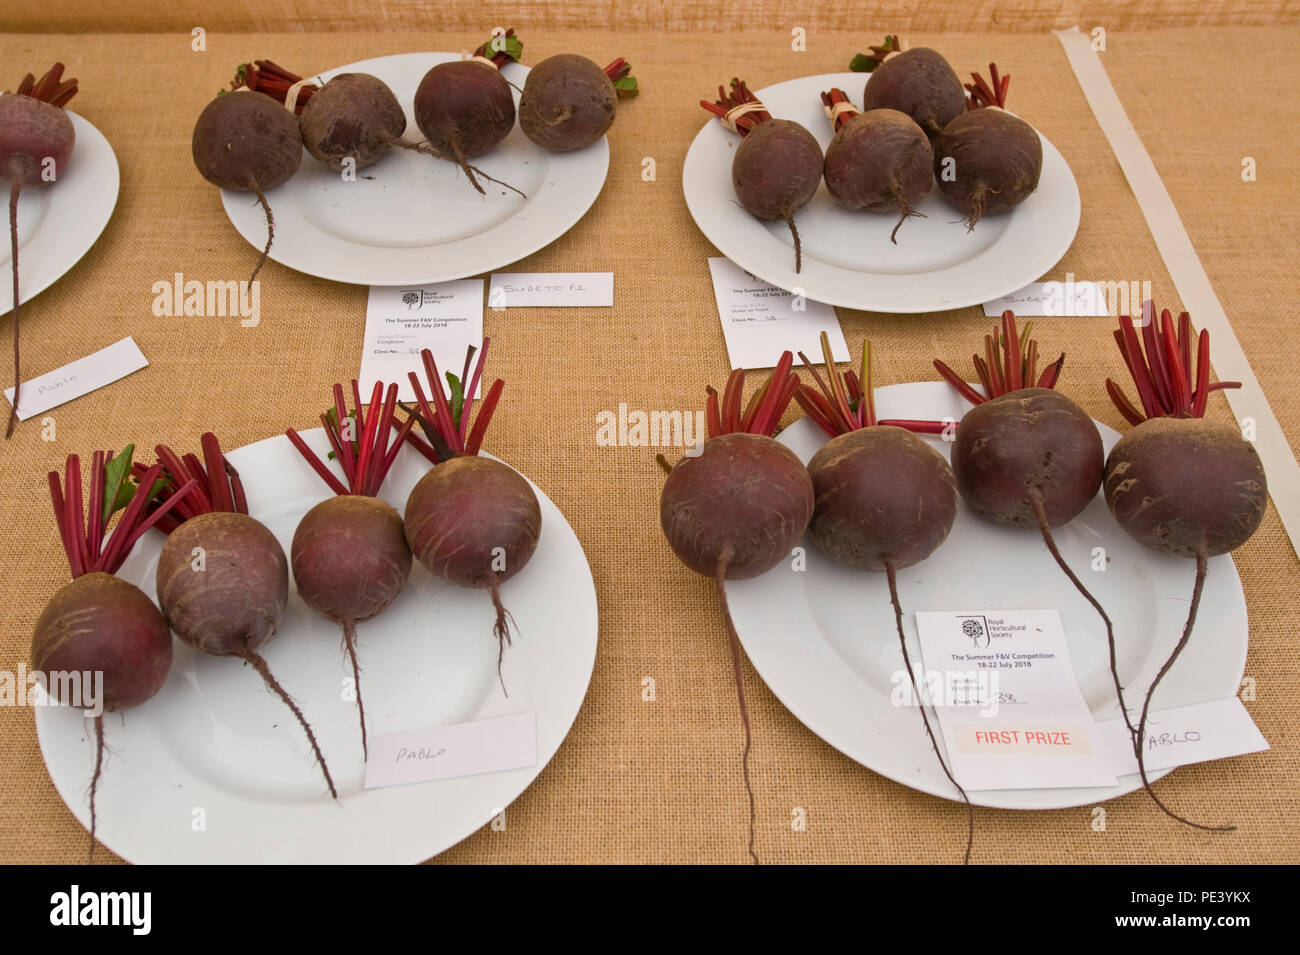 Prizewinning beetroot exhibited at RHS Tatton Park flower show Cheshire England UK Stock Photo